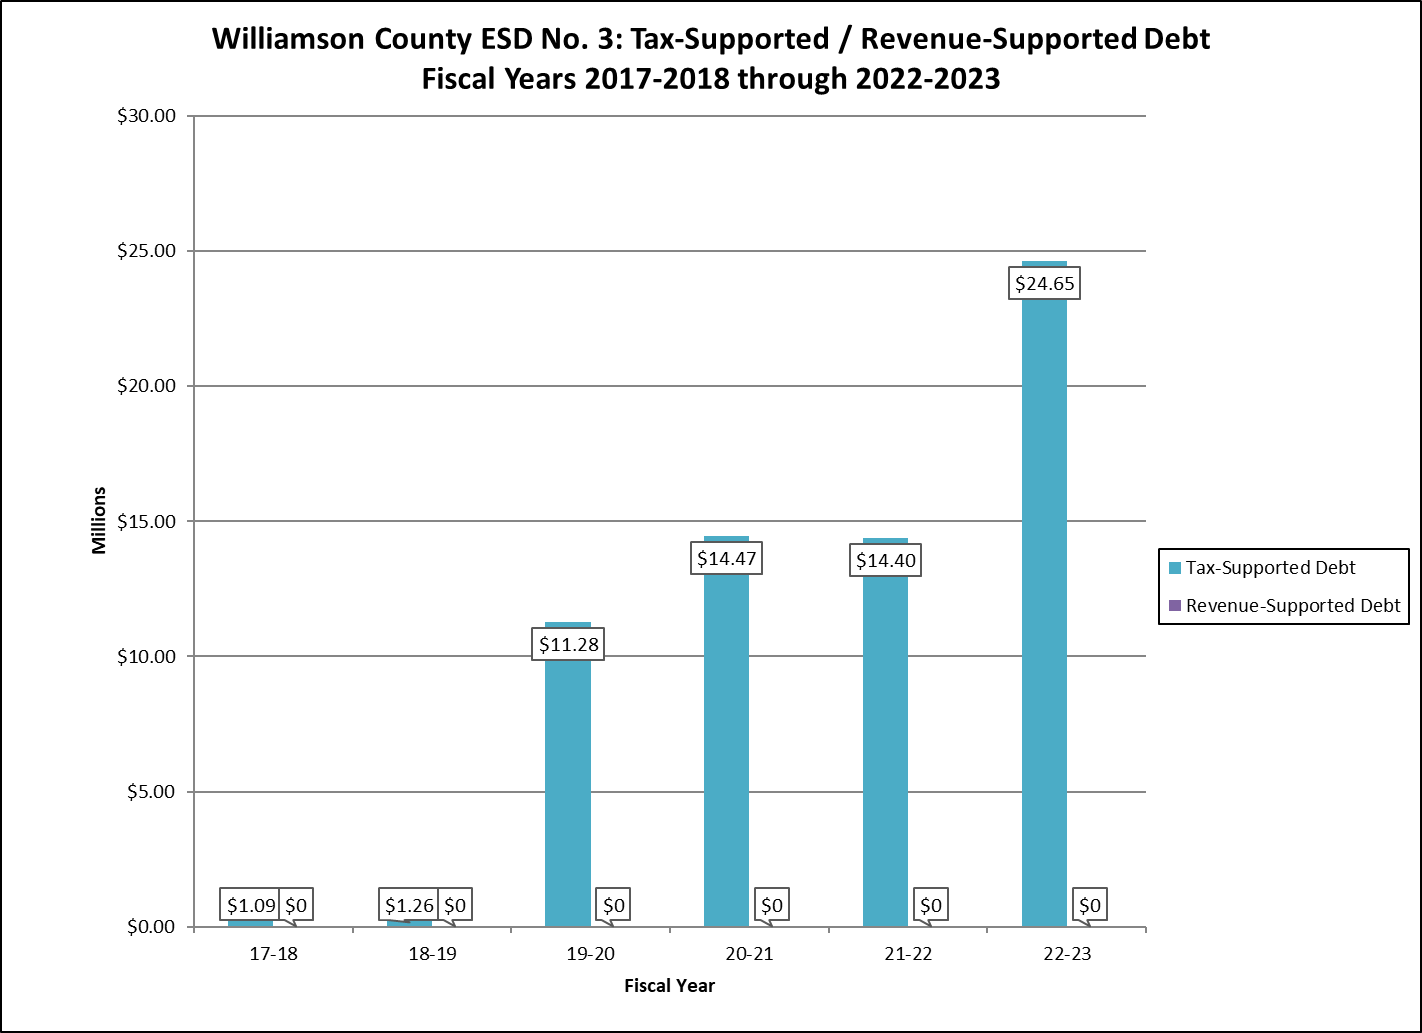 The Williamson County Emergency Services District #3 Inflation-Adjusted Tax-Supported Debt Per Capita